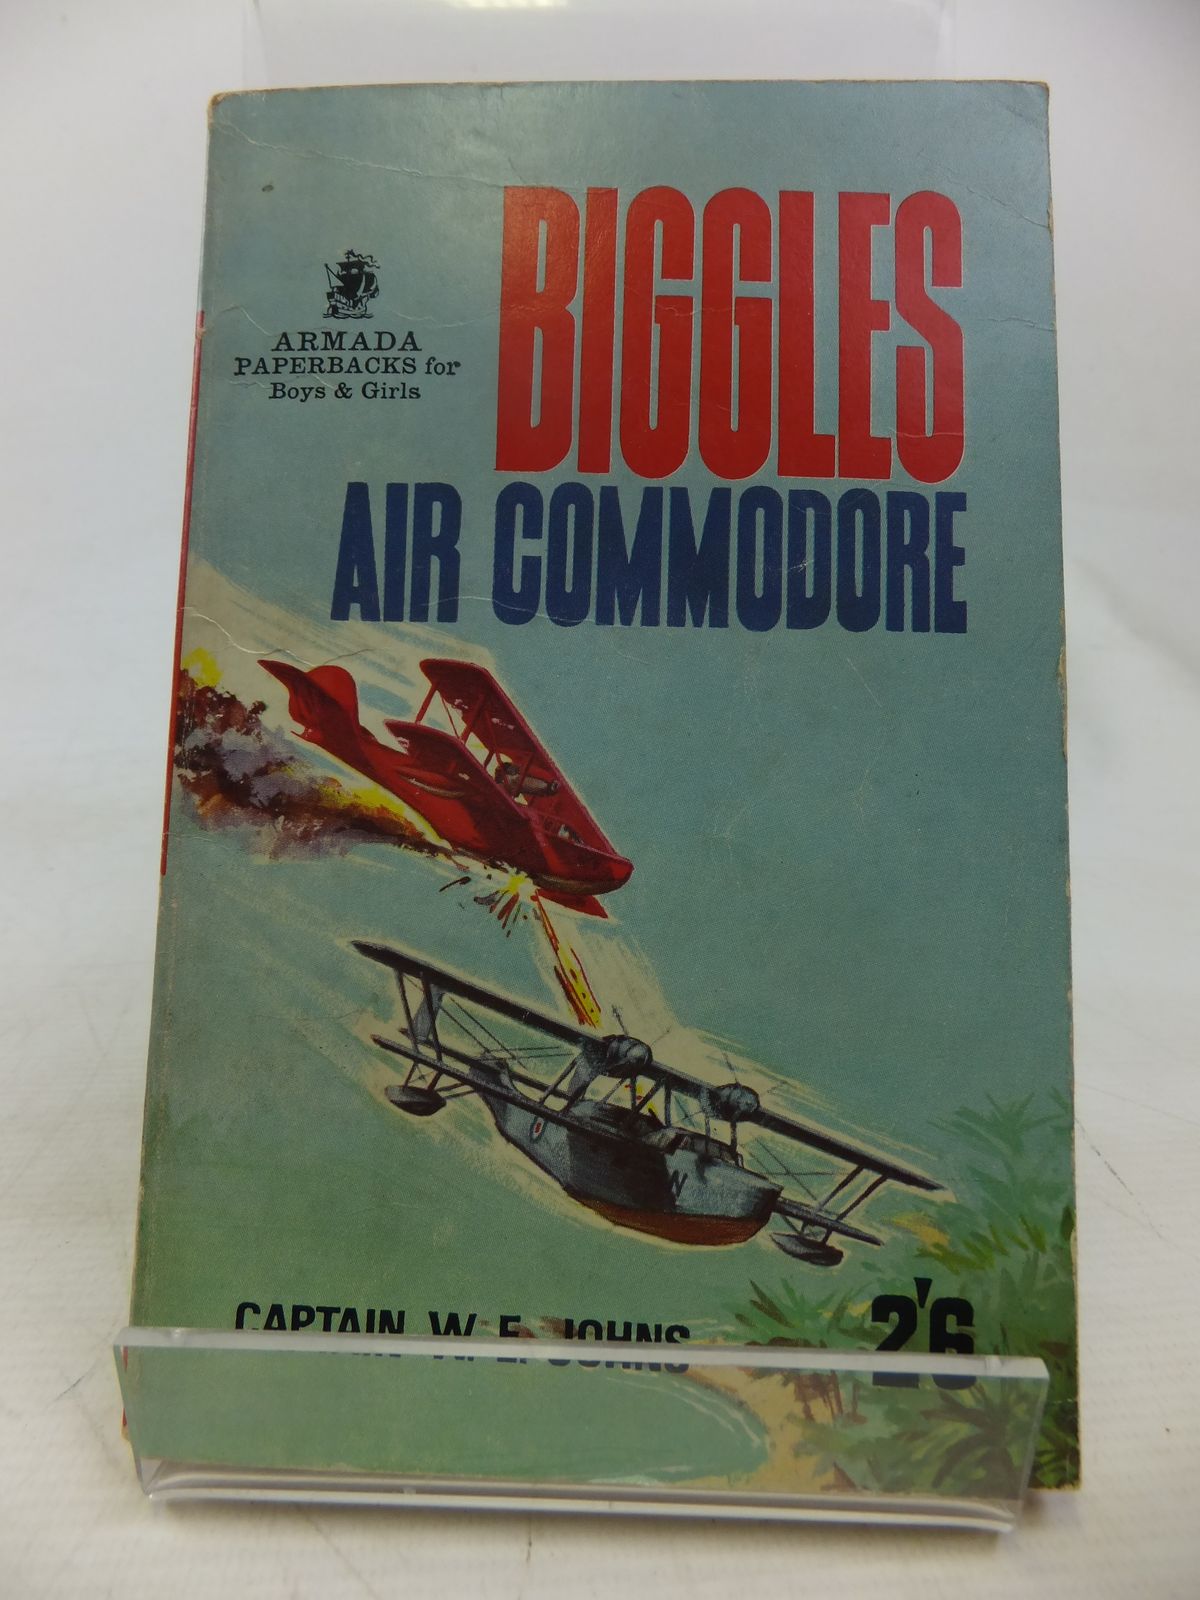 Cover of BIGGLES AIR COMMODORE by W.E. Johns